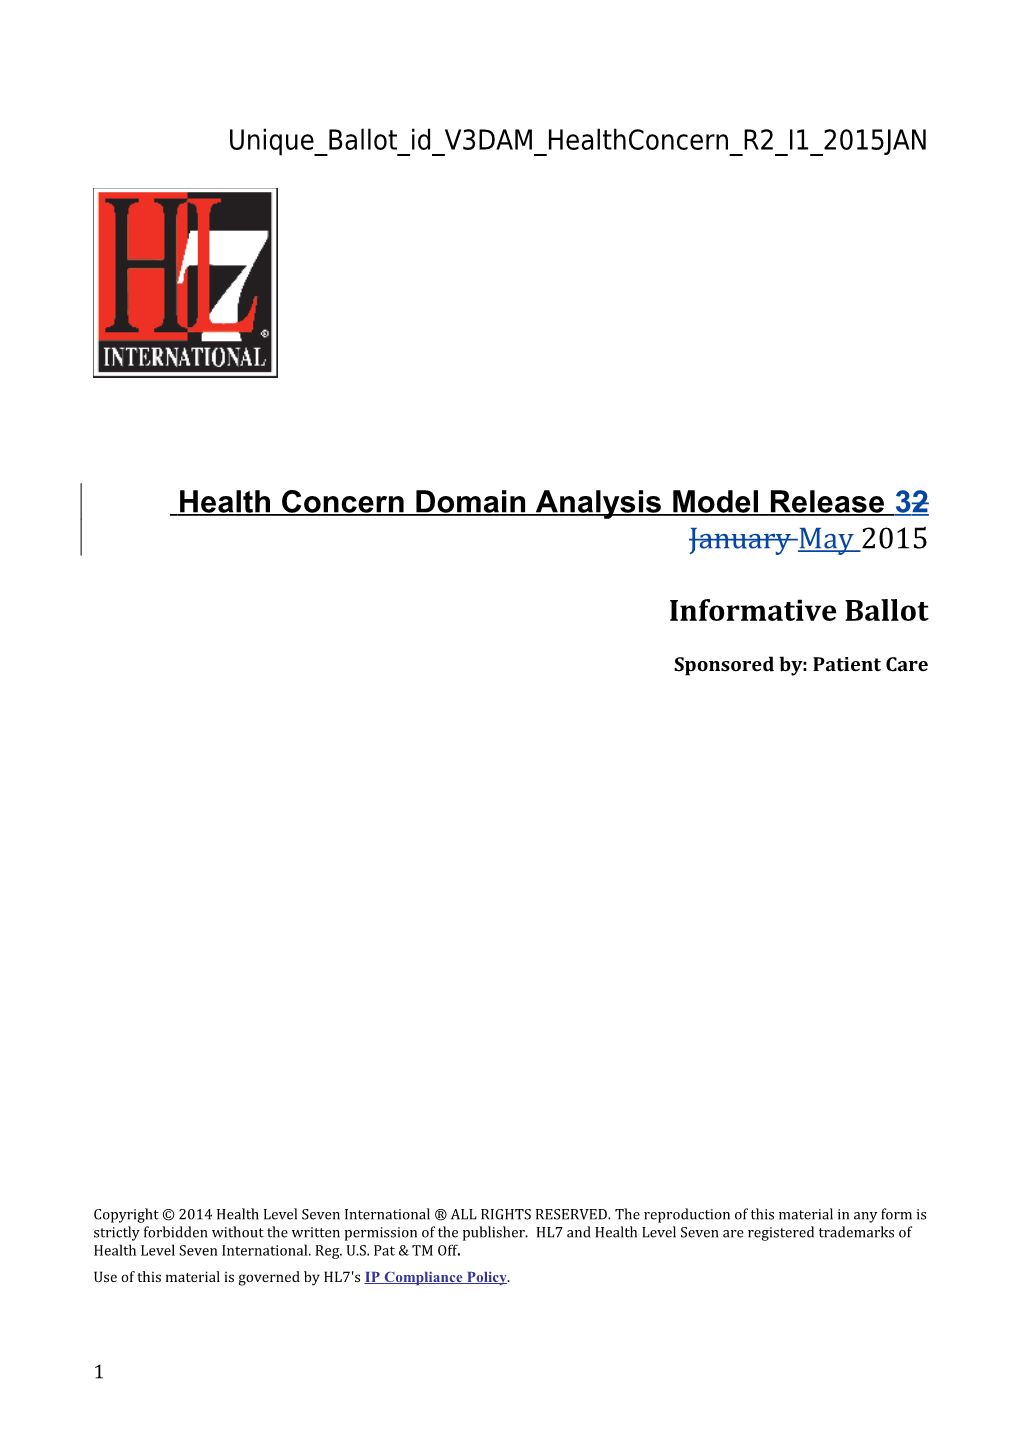 Health Concern Domain Analysis Model Release 32